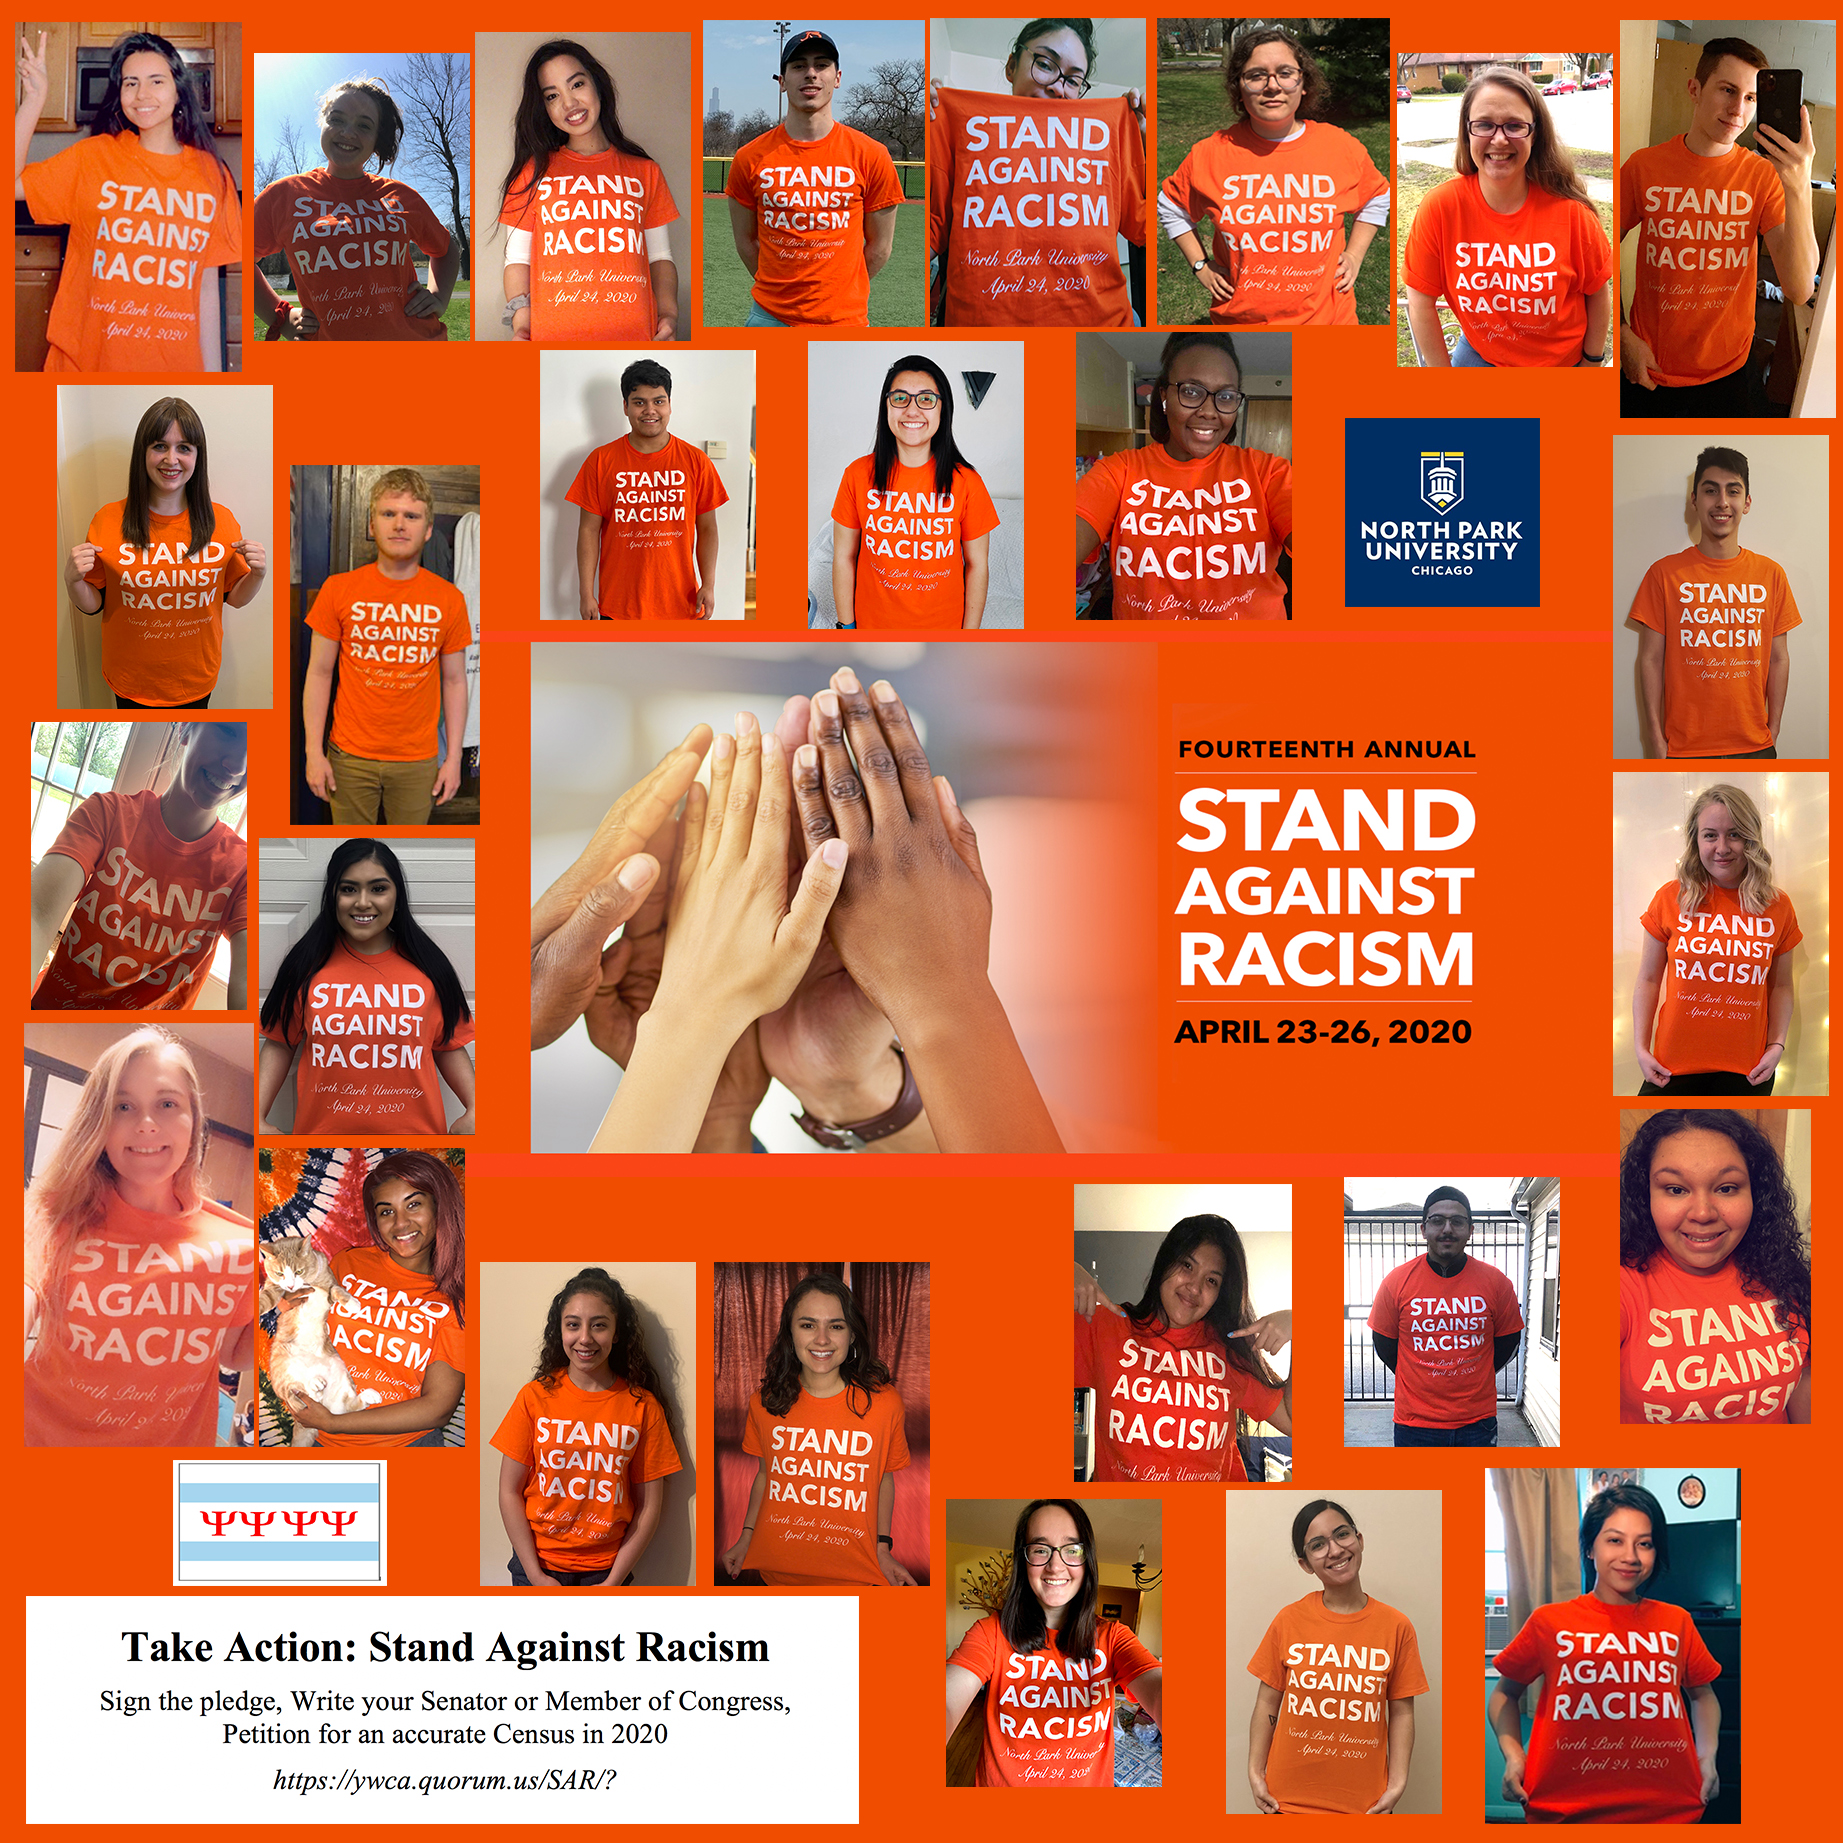 Fourteenth Annual Stand Against Racism, April 23-26, 2020, Take Action: Stand Against Racsim, Sign the Pledge, Write your senator or Member of Congress, Petition for an accurate Census in 2020 https://ywca.quorum.us/SAR/?